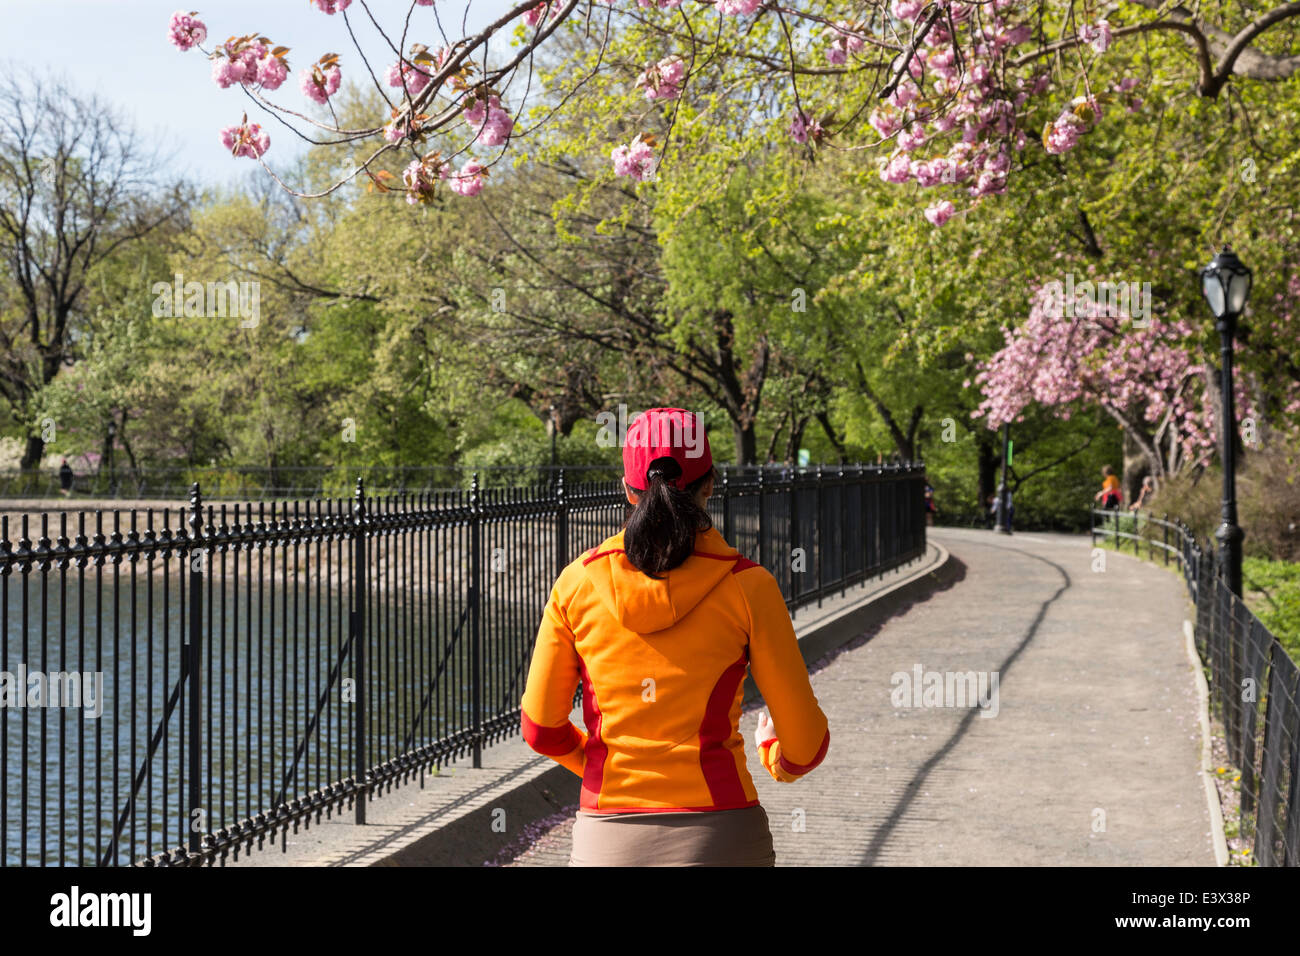 Runner on The Reservoir Jogging Path, Central Park, NYC, USA Stock Photo